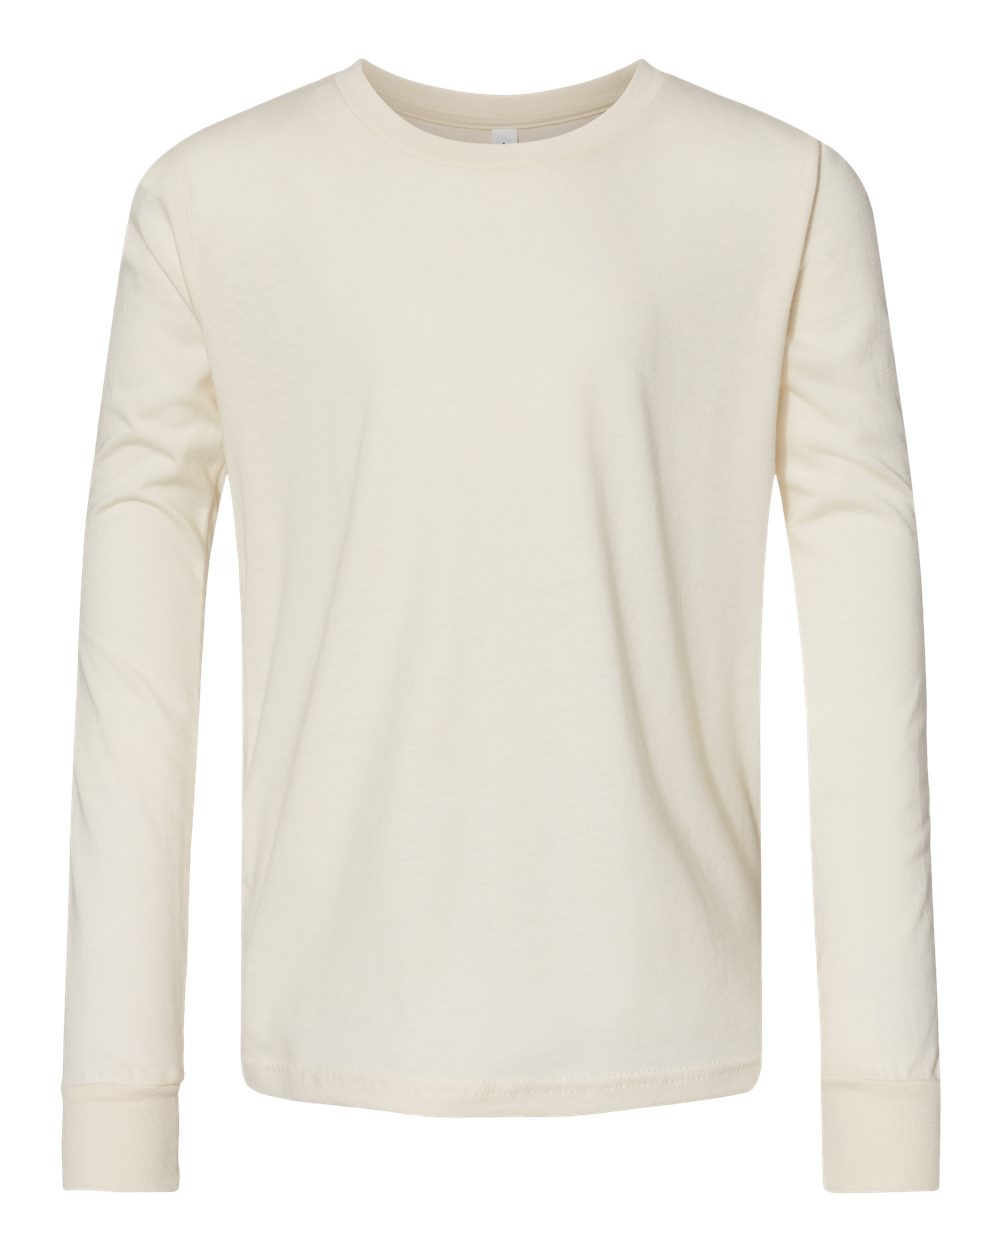 Bella + Canvas Youth Long Sleeve (3501y) in Natural